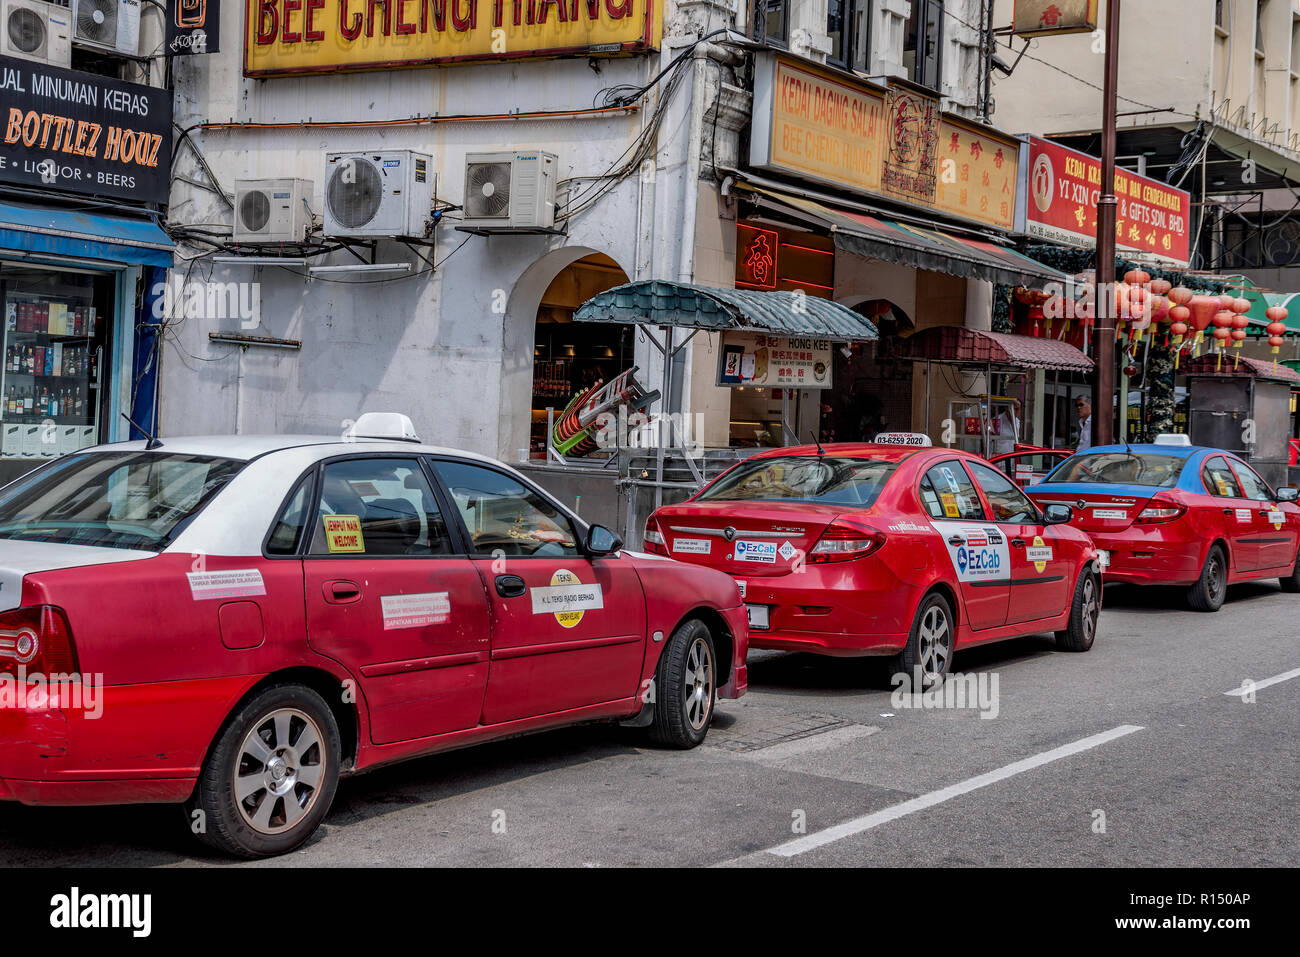 Kuala Lumpur Malaysia July 21 This Is A Taxi Rank On A Street In Chinatown Which Is A Busy Travel Destination On July 21 2018 In Kuala Lumpur Stock Photo Alamy